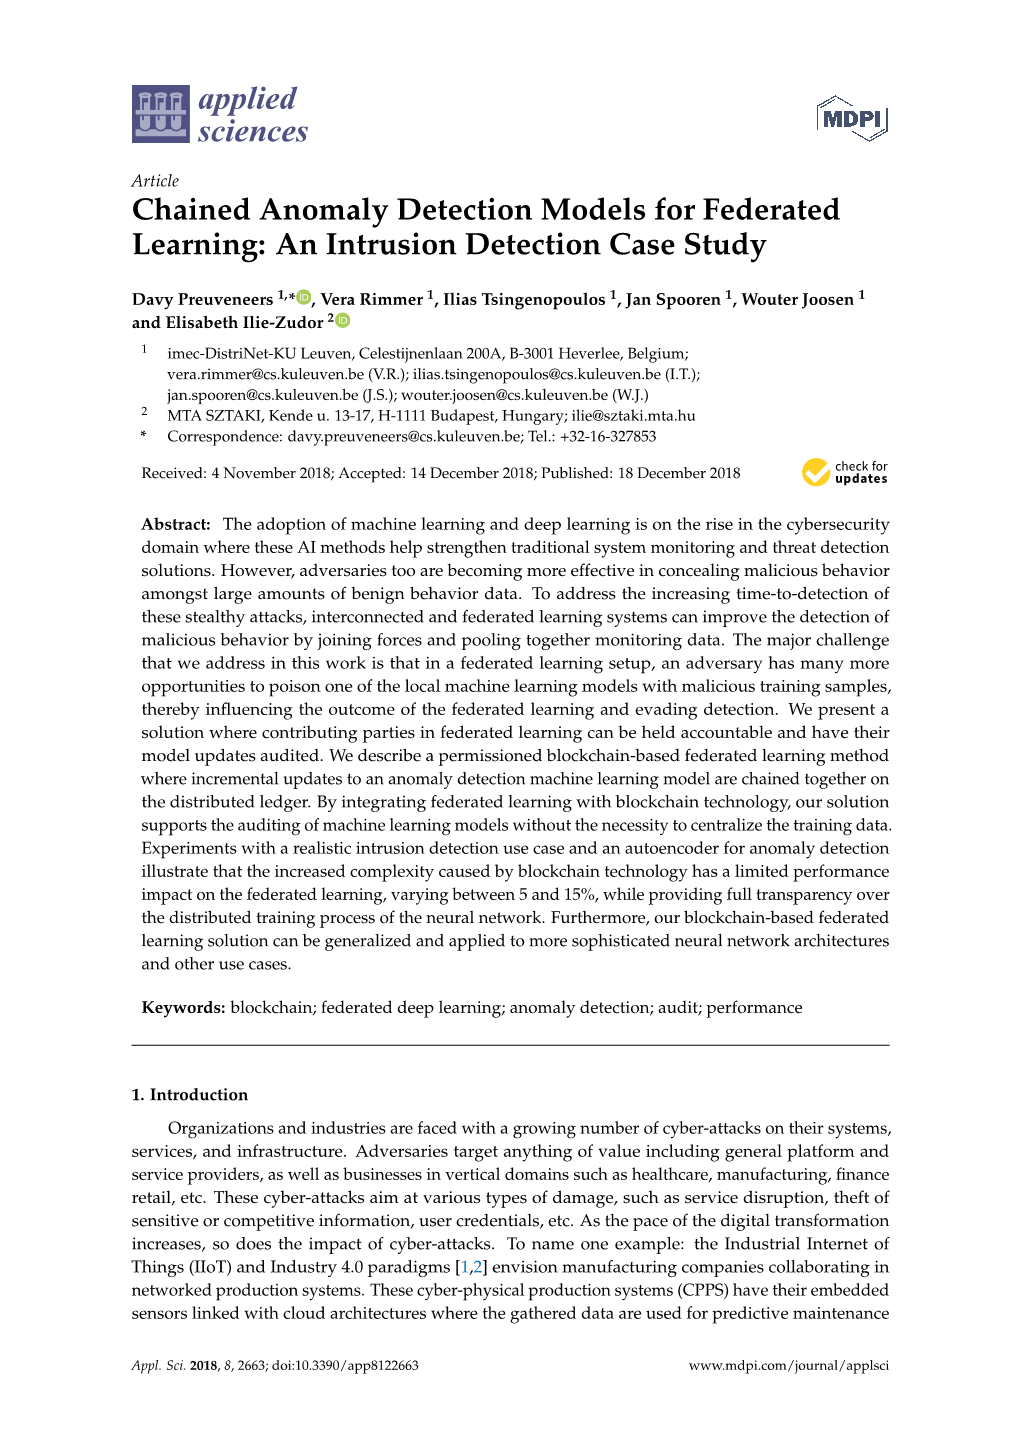 Chained Anomaly Detection Models for Federated Learning: an Intrusion Detection Case Study